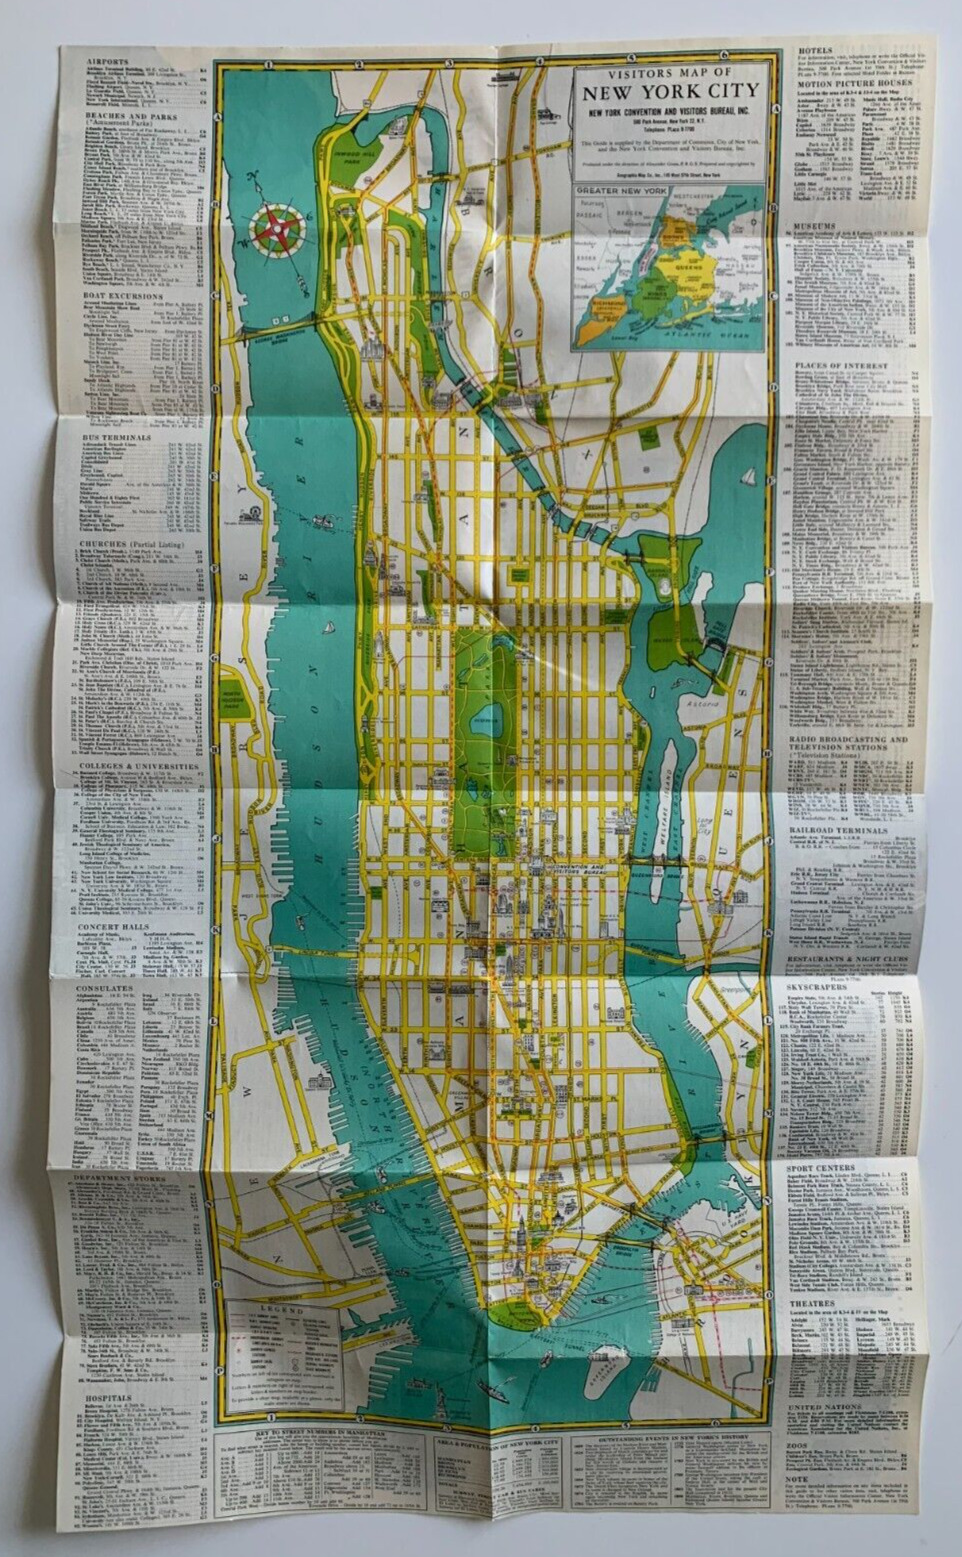 Vintage ca 1949 Visitors Guide & Map to New York City NYC Manhattan Subways